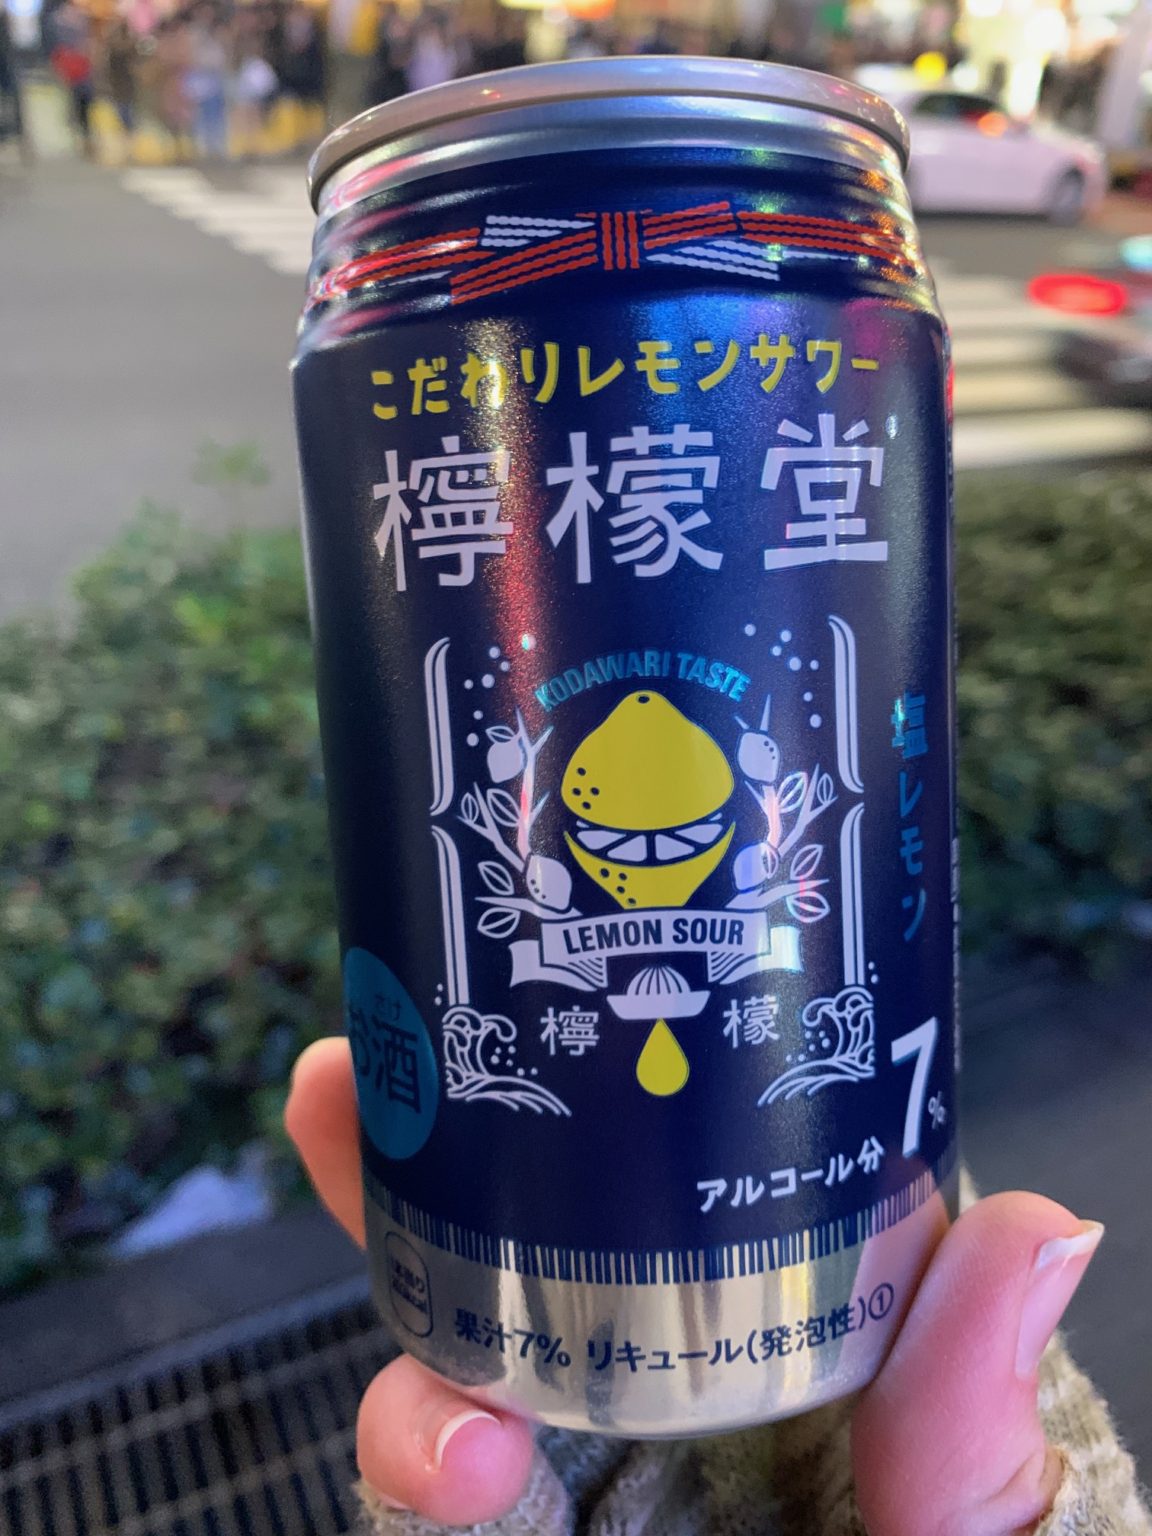 Our favorite chu-hai cocktail beer in Japan